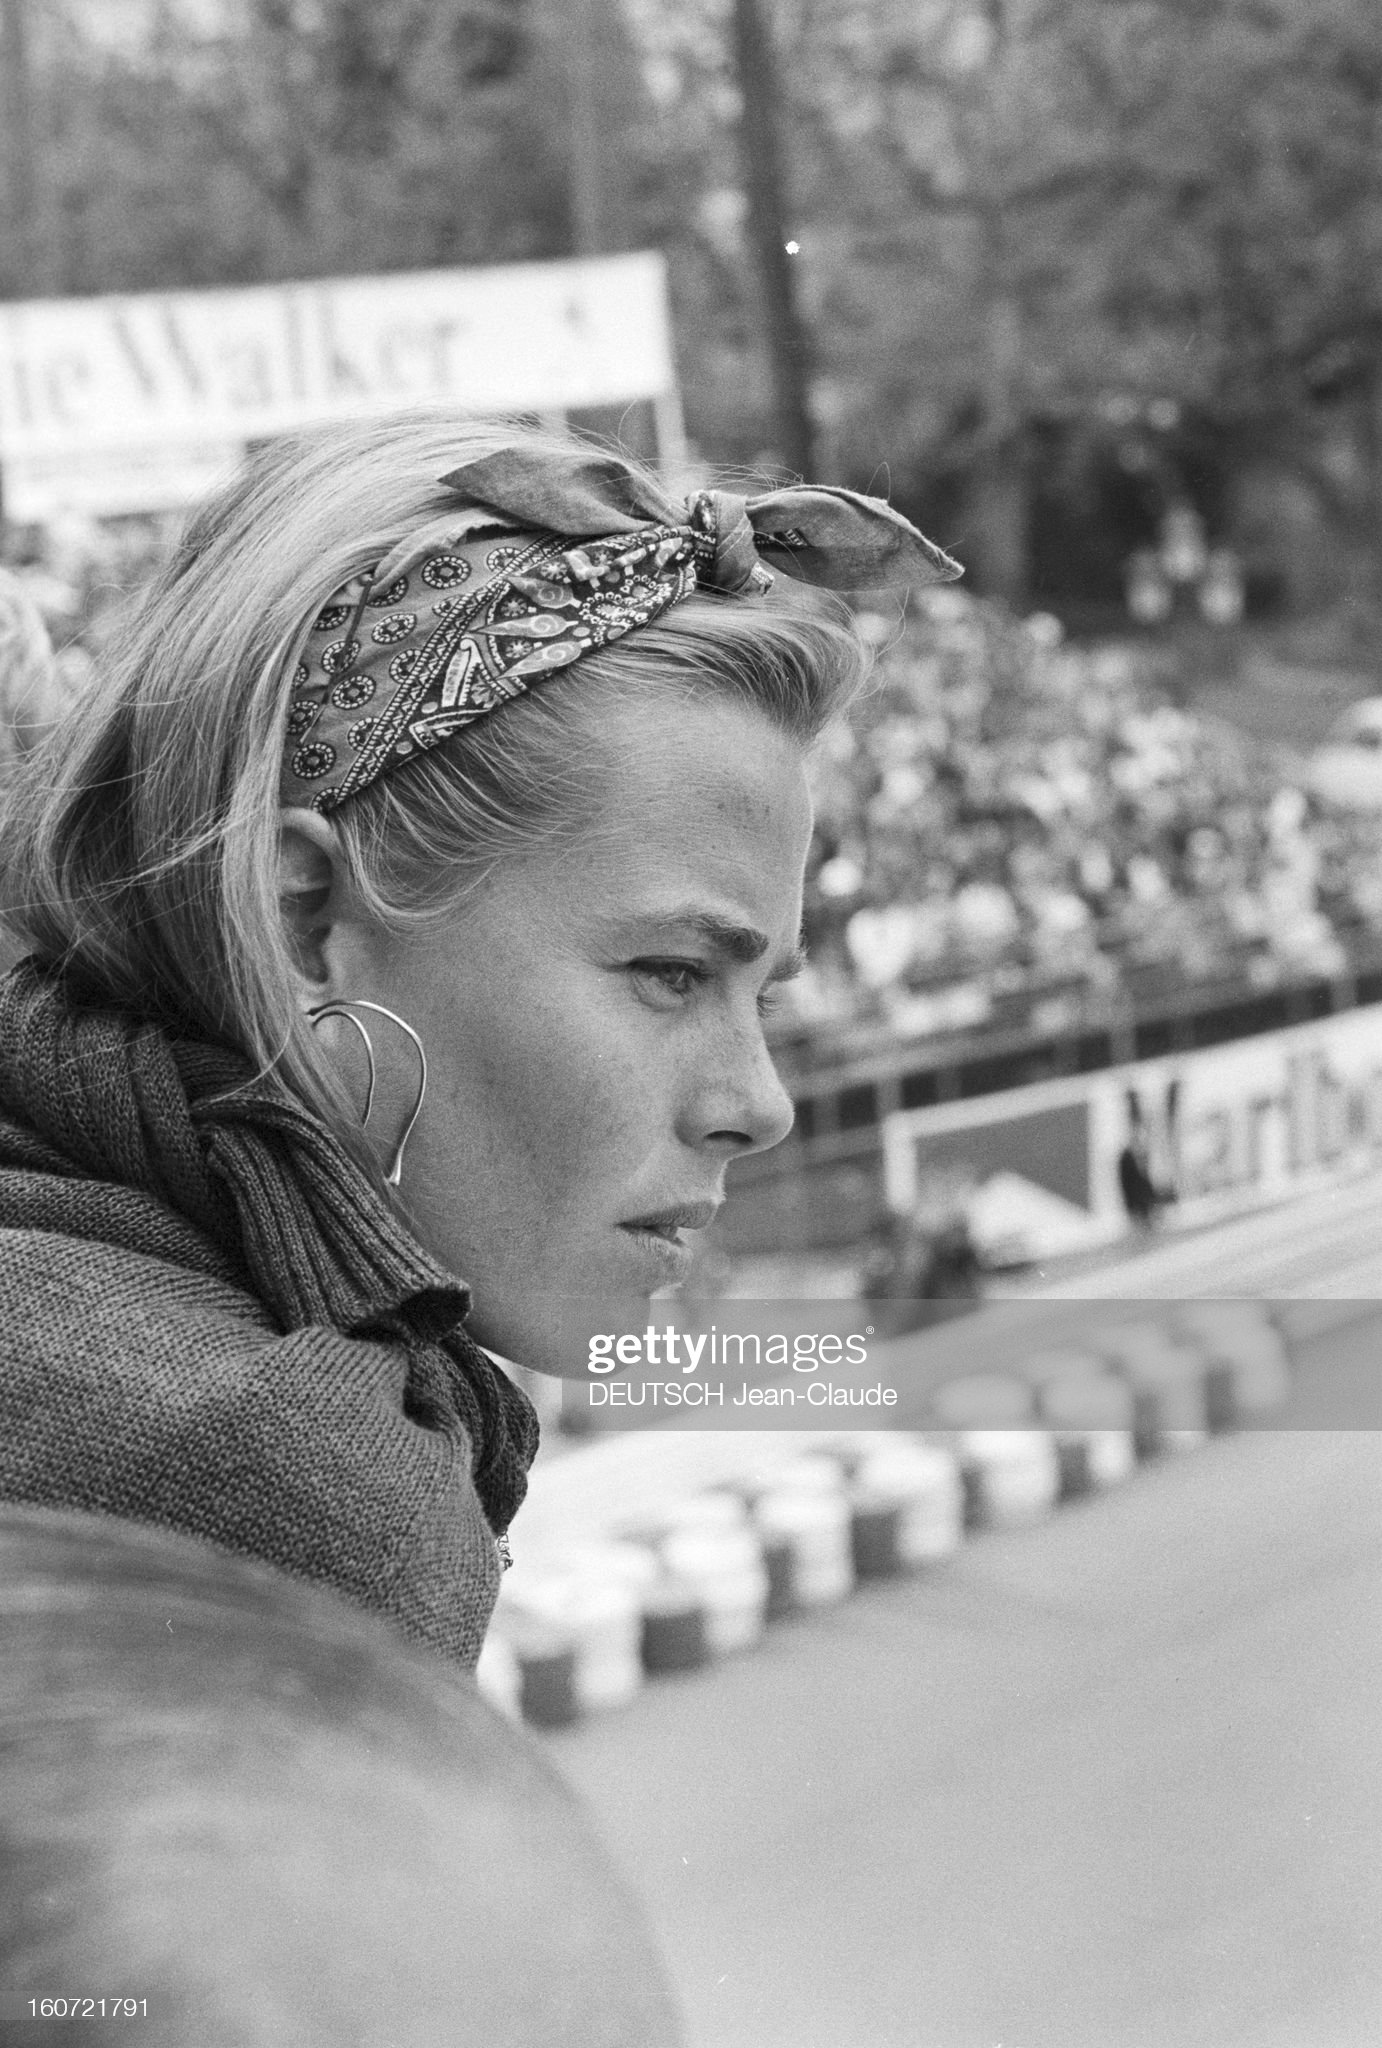 On May 18, 1980, during the Monaco Formula 1 Grand Prix, profile portrait of Margaux Hemingway, the writer's granddaughter, with a headband in her hair.